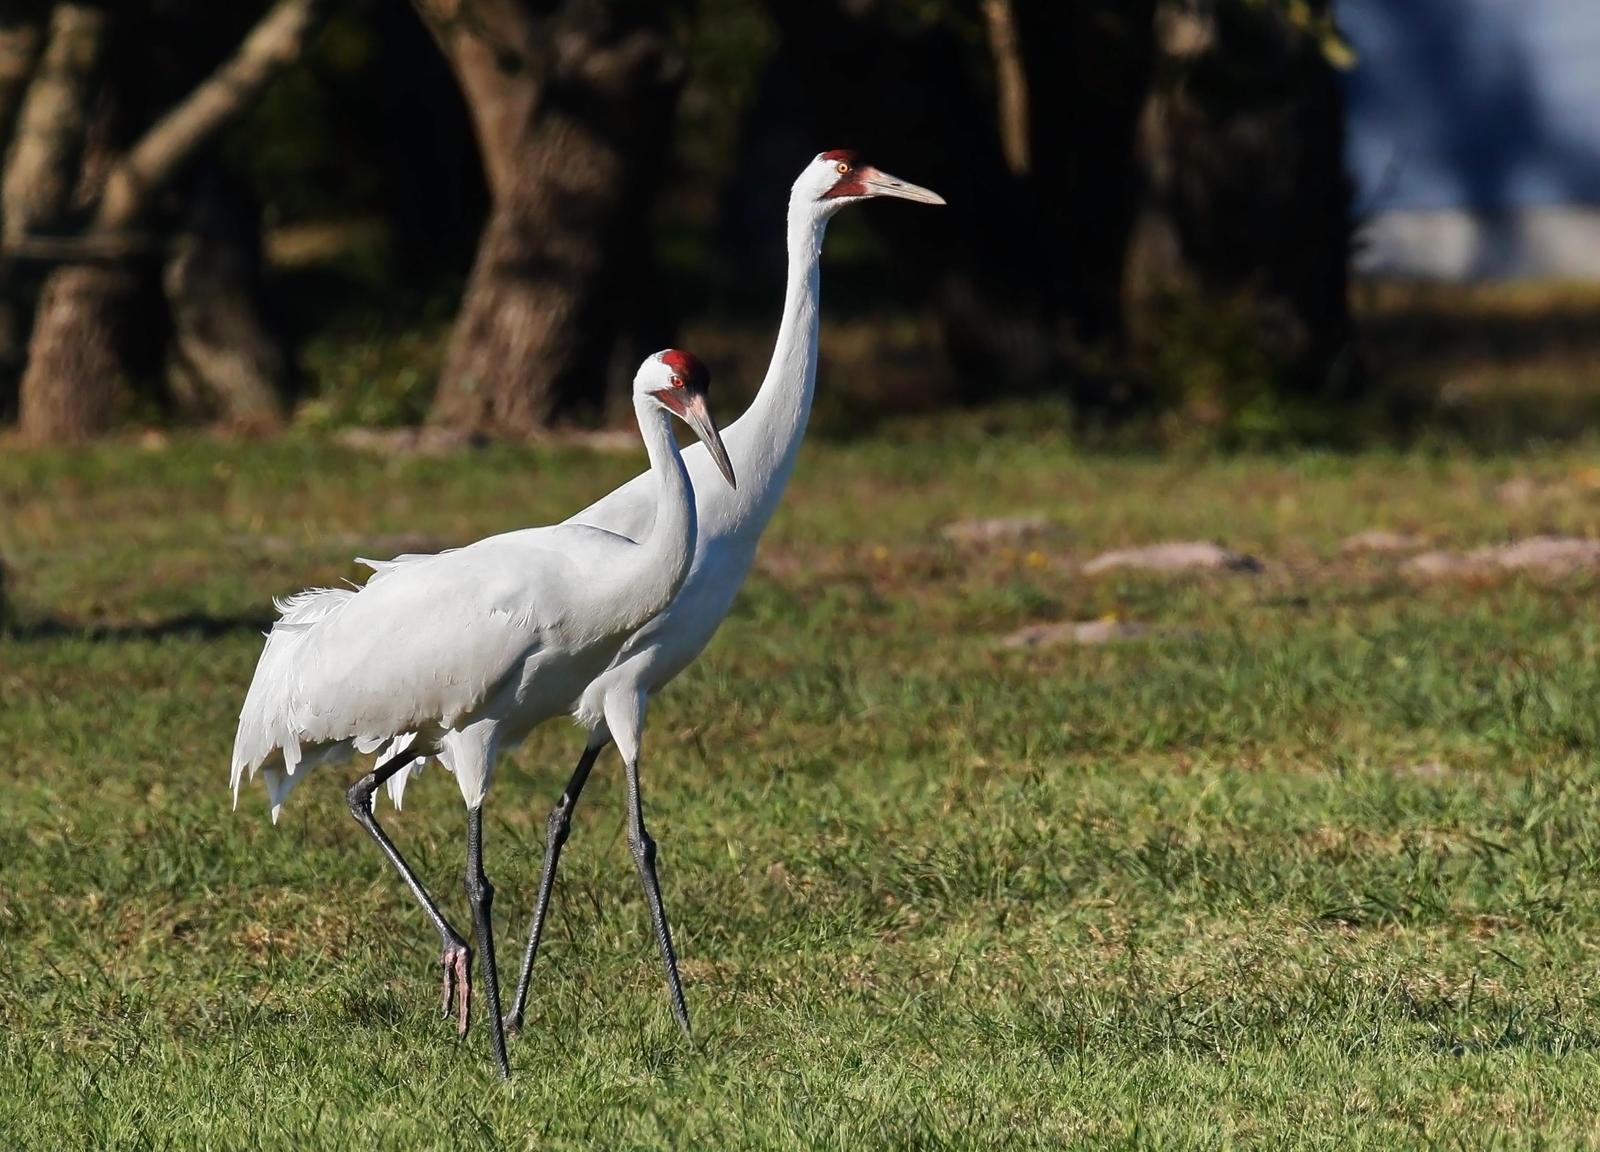 Whooping Crane Photo by Emily Willoughby